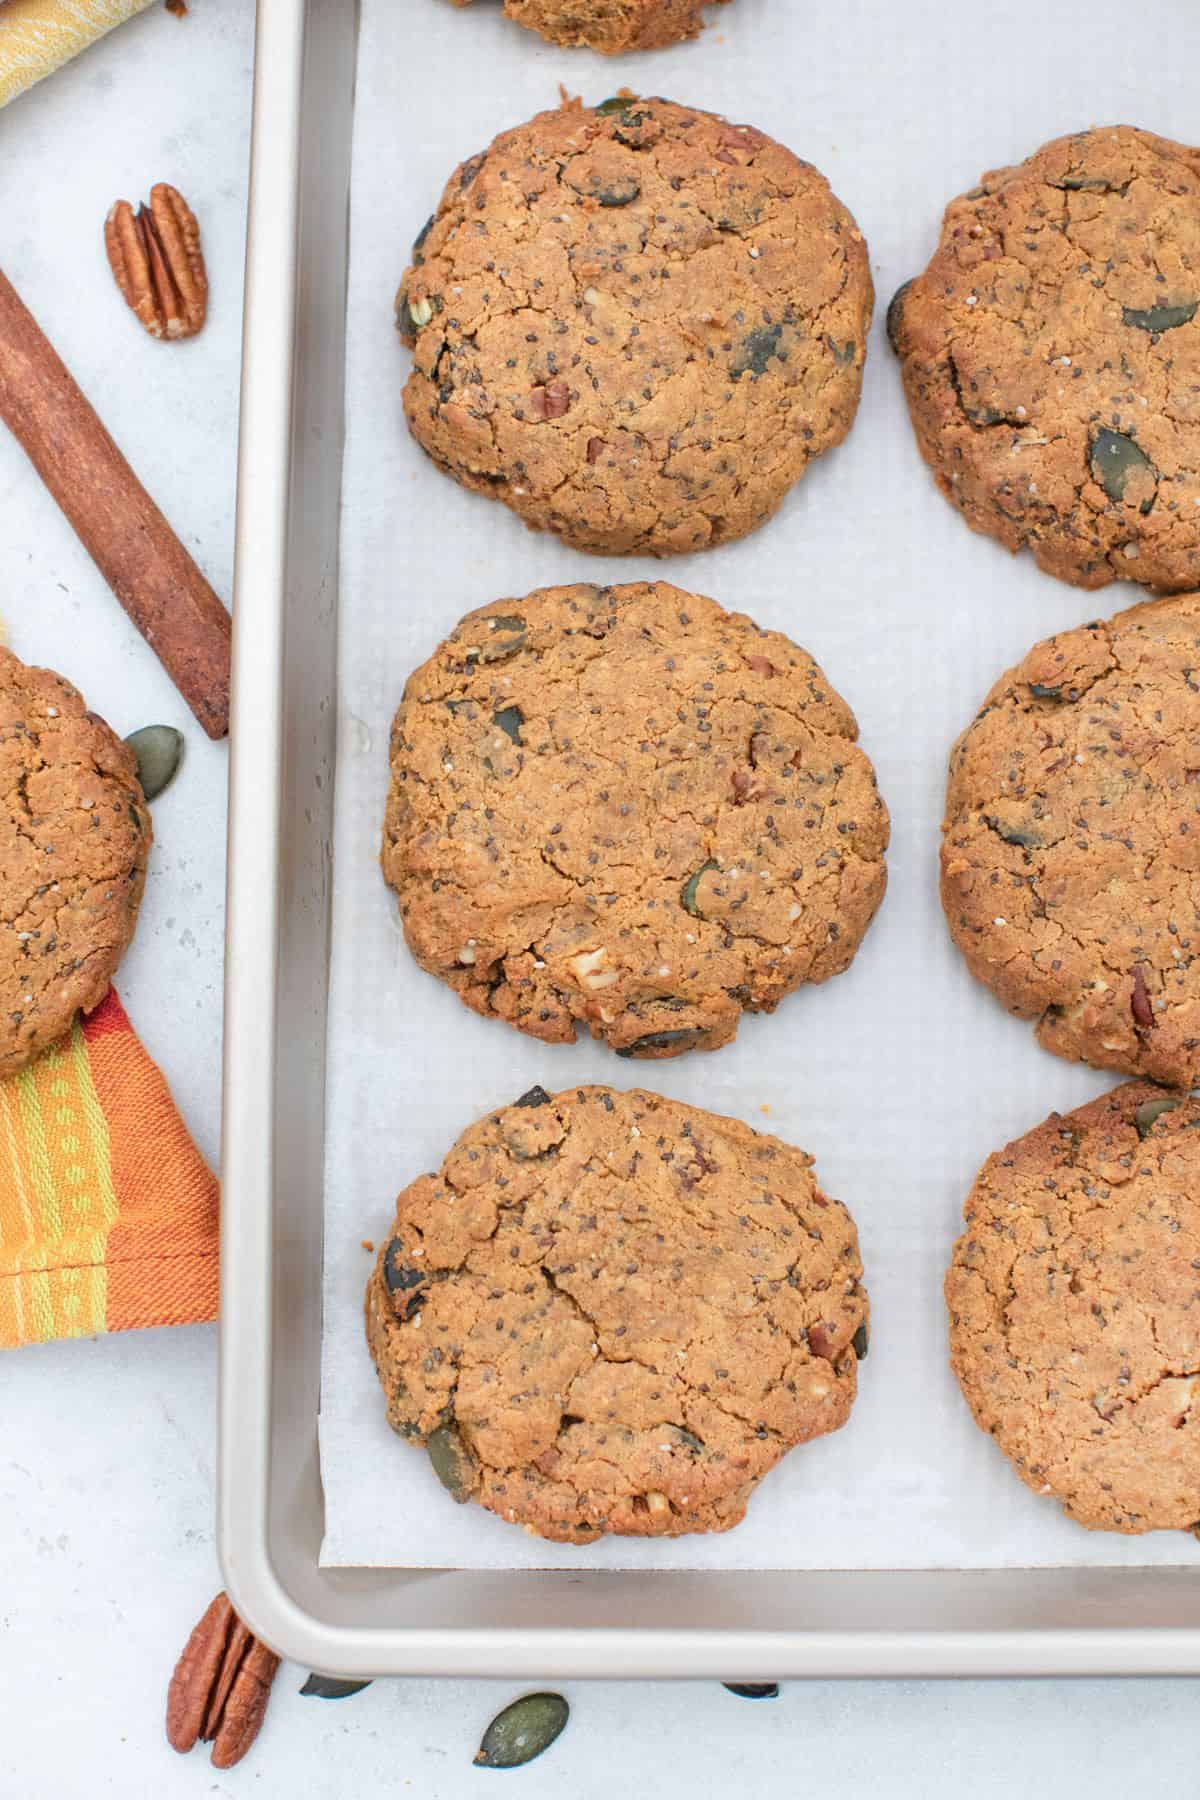 Baked breakfast cookies on parchment paper lined baking sheet.